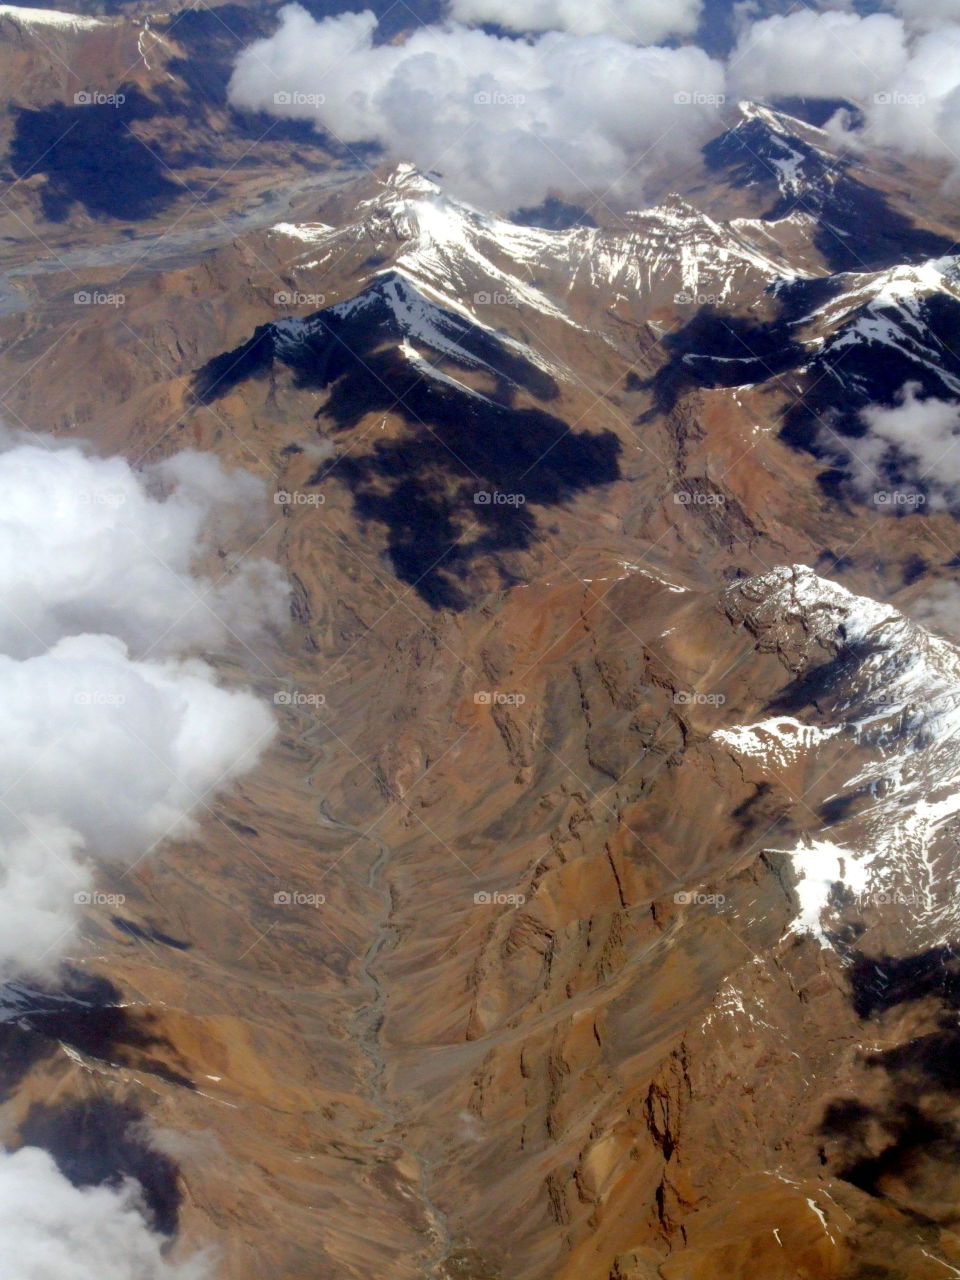 Ladakh from the sky